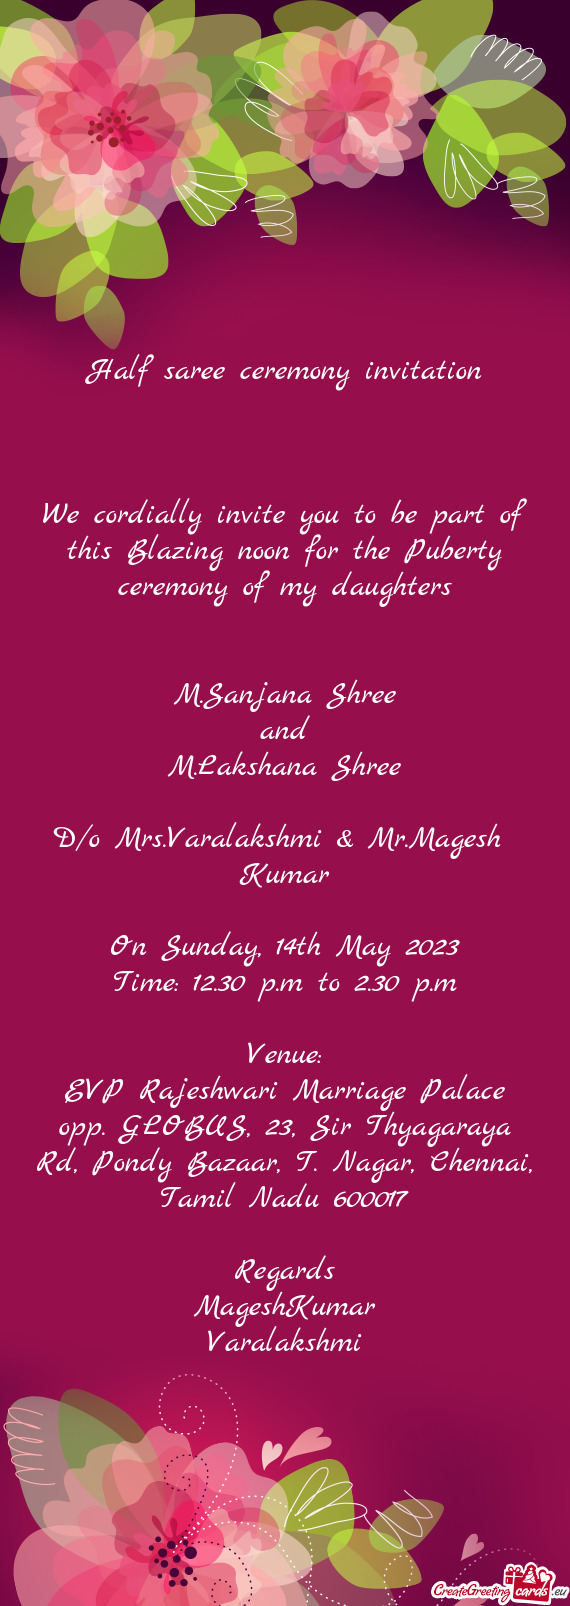 We cordially invite you to be part of this Blazing noon for the Puberty ceremony of my daughters